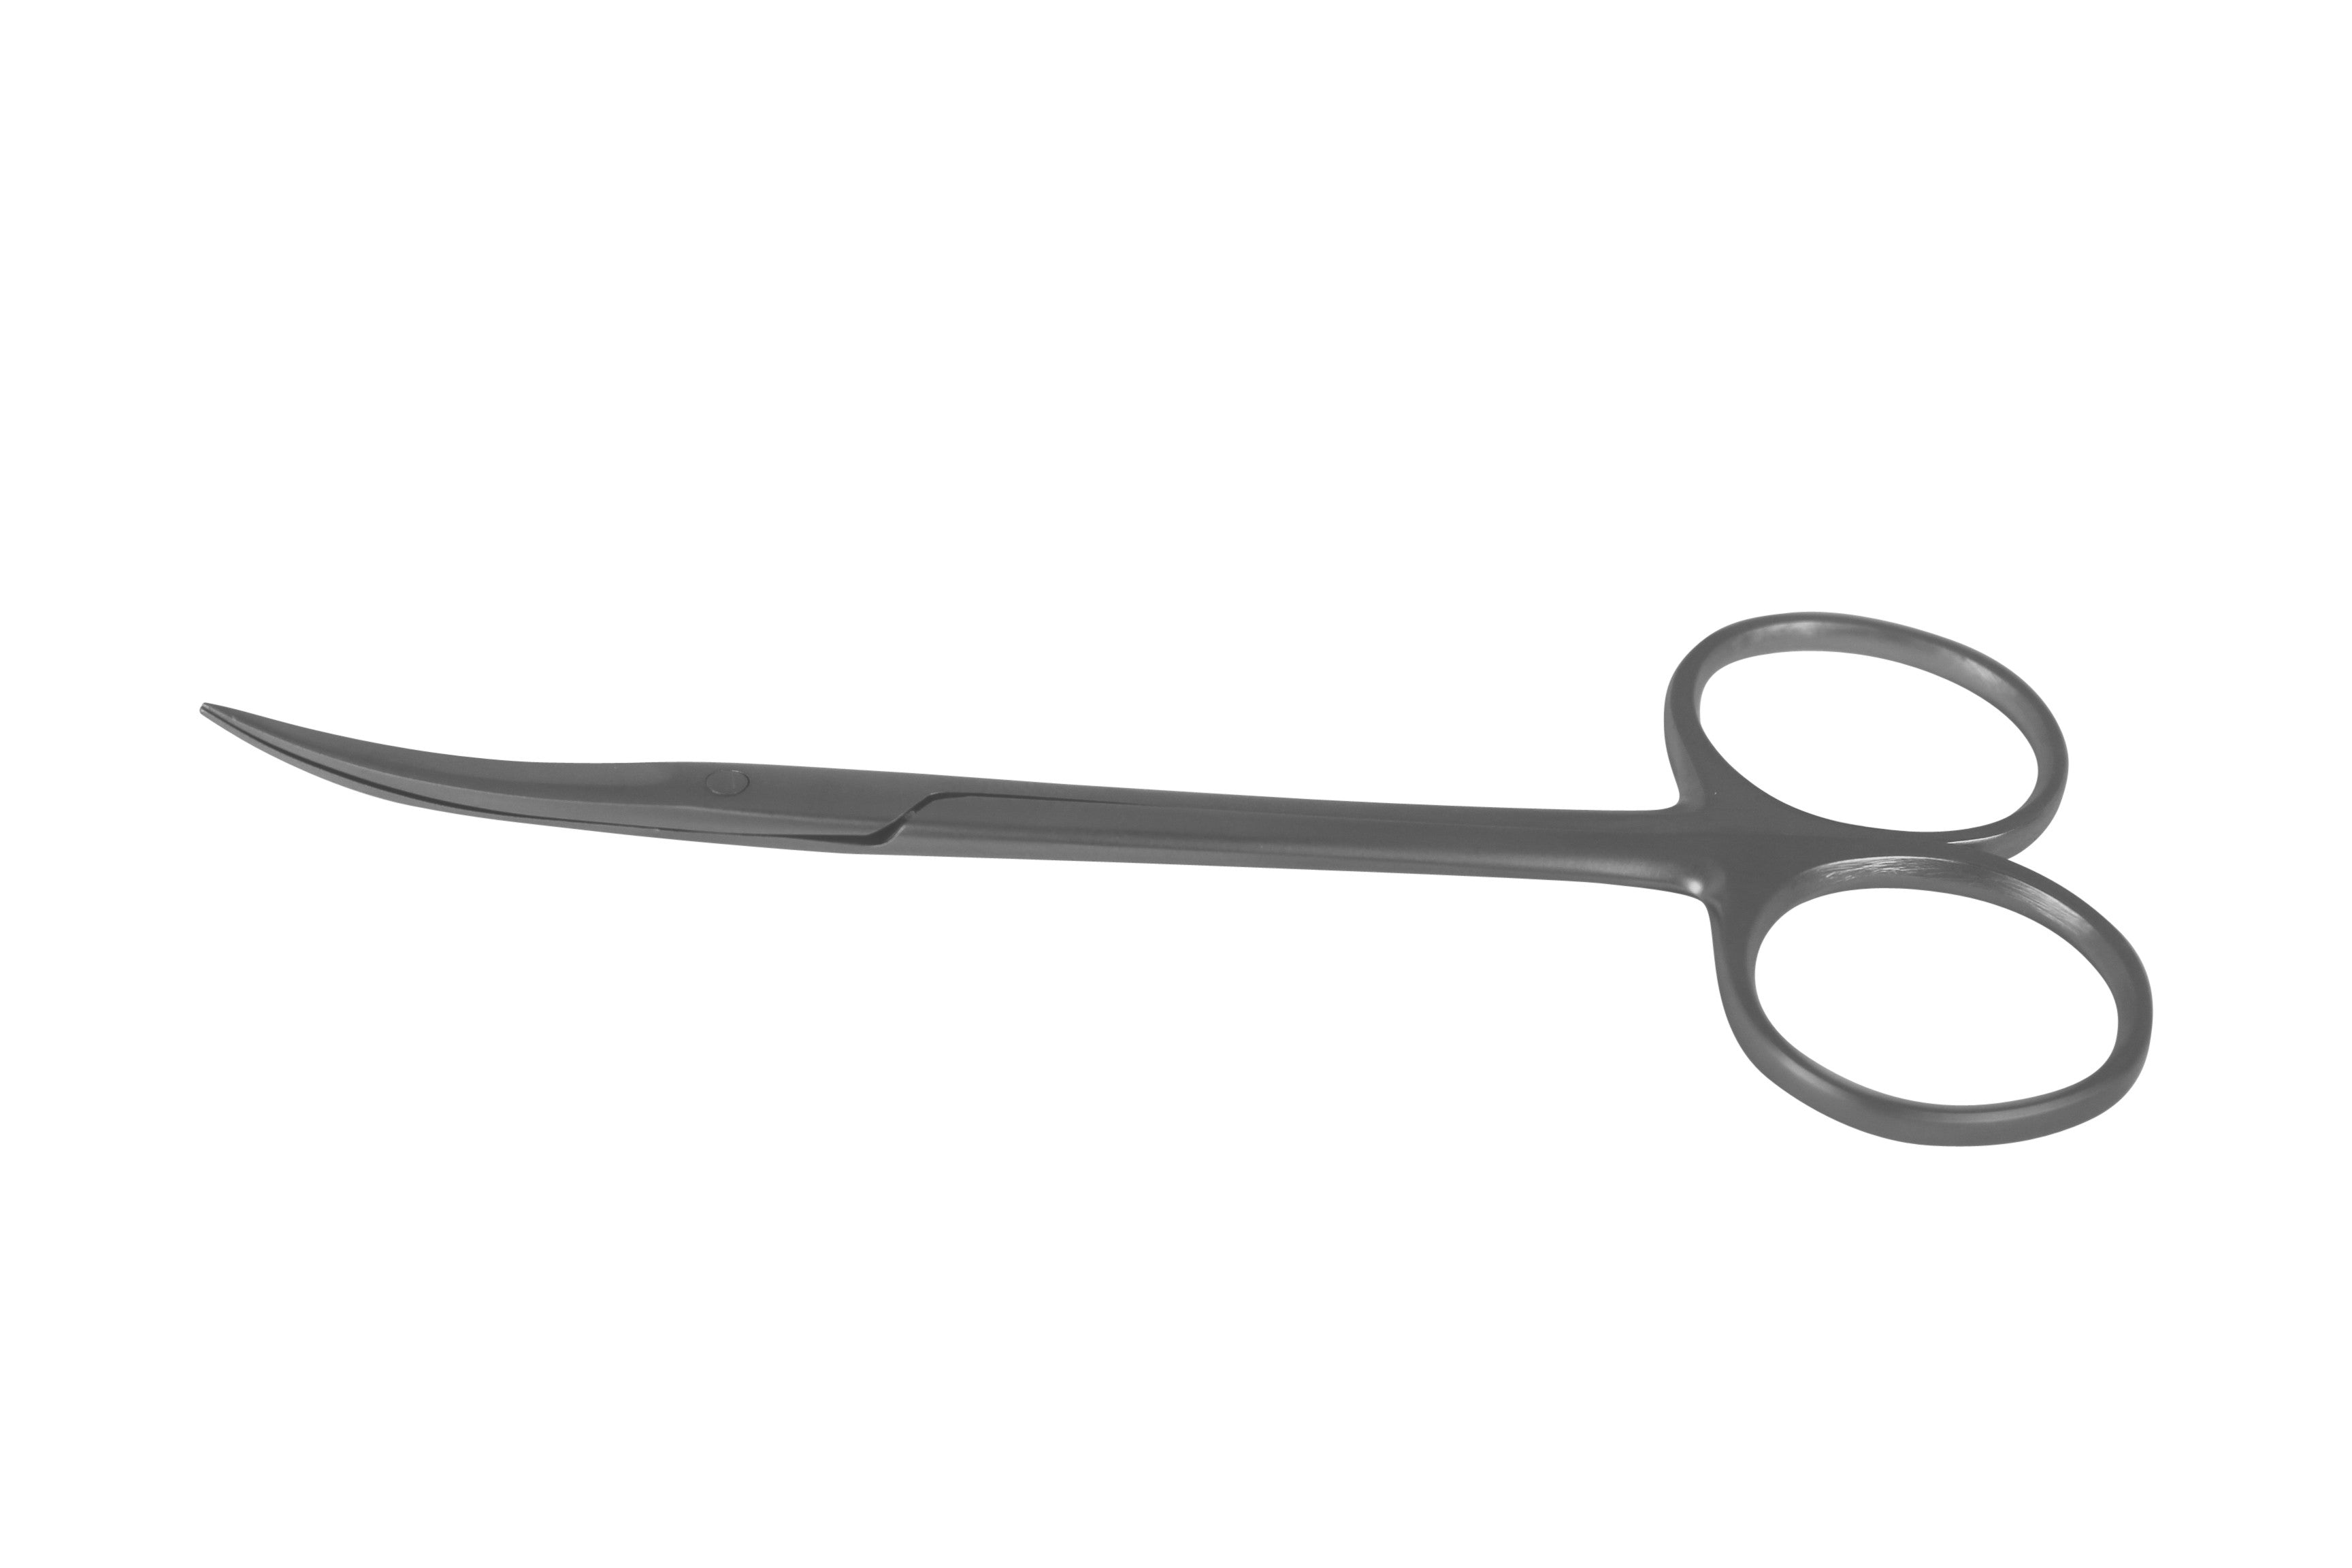 Iris Scissors Long Curved 115mm Long (Stainless Steel), Disposable and  Reusable Animal Feeding Needles